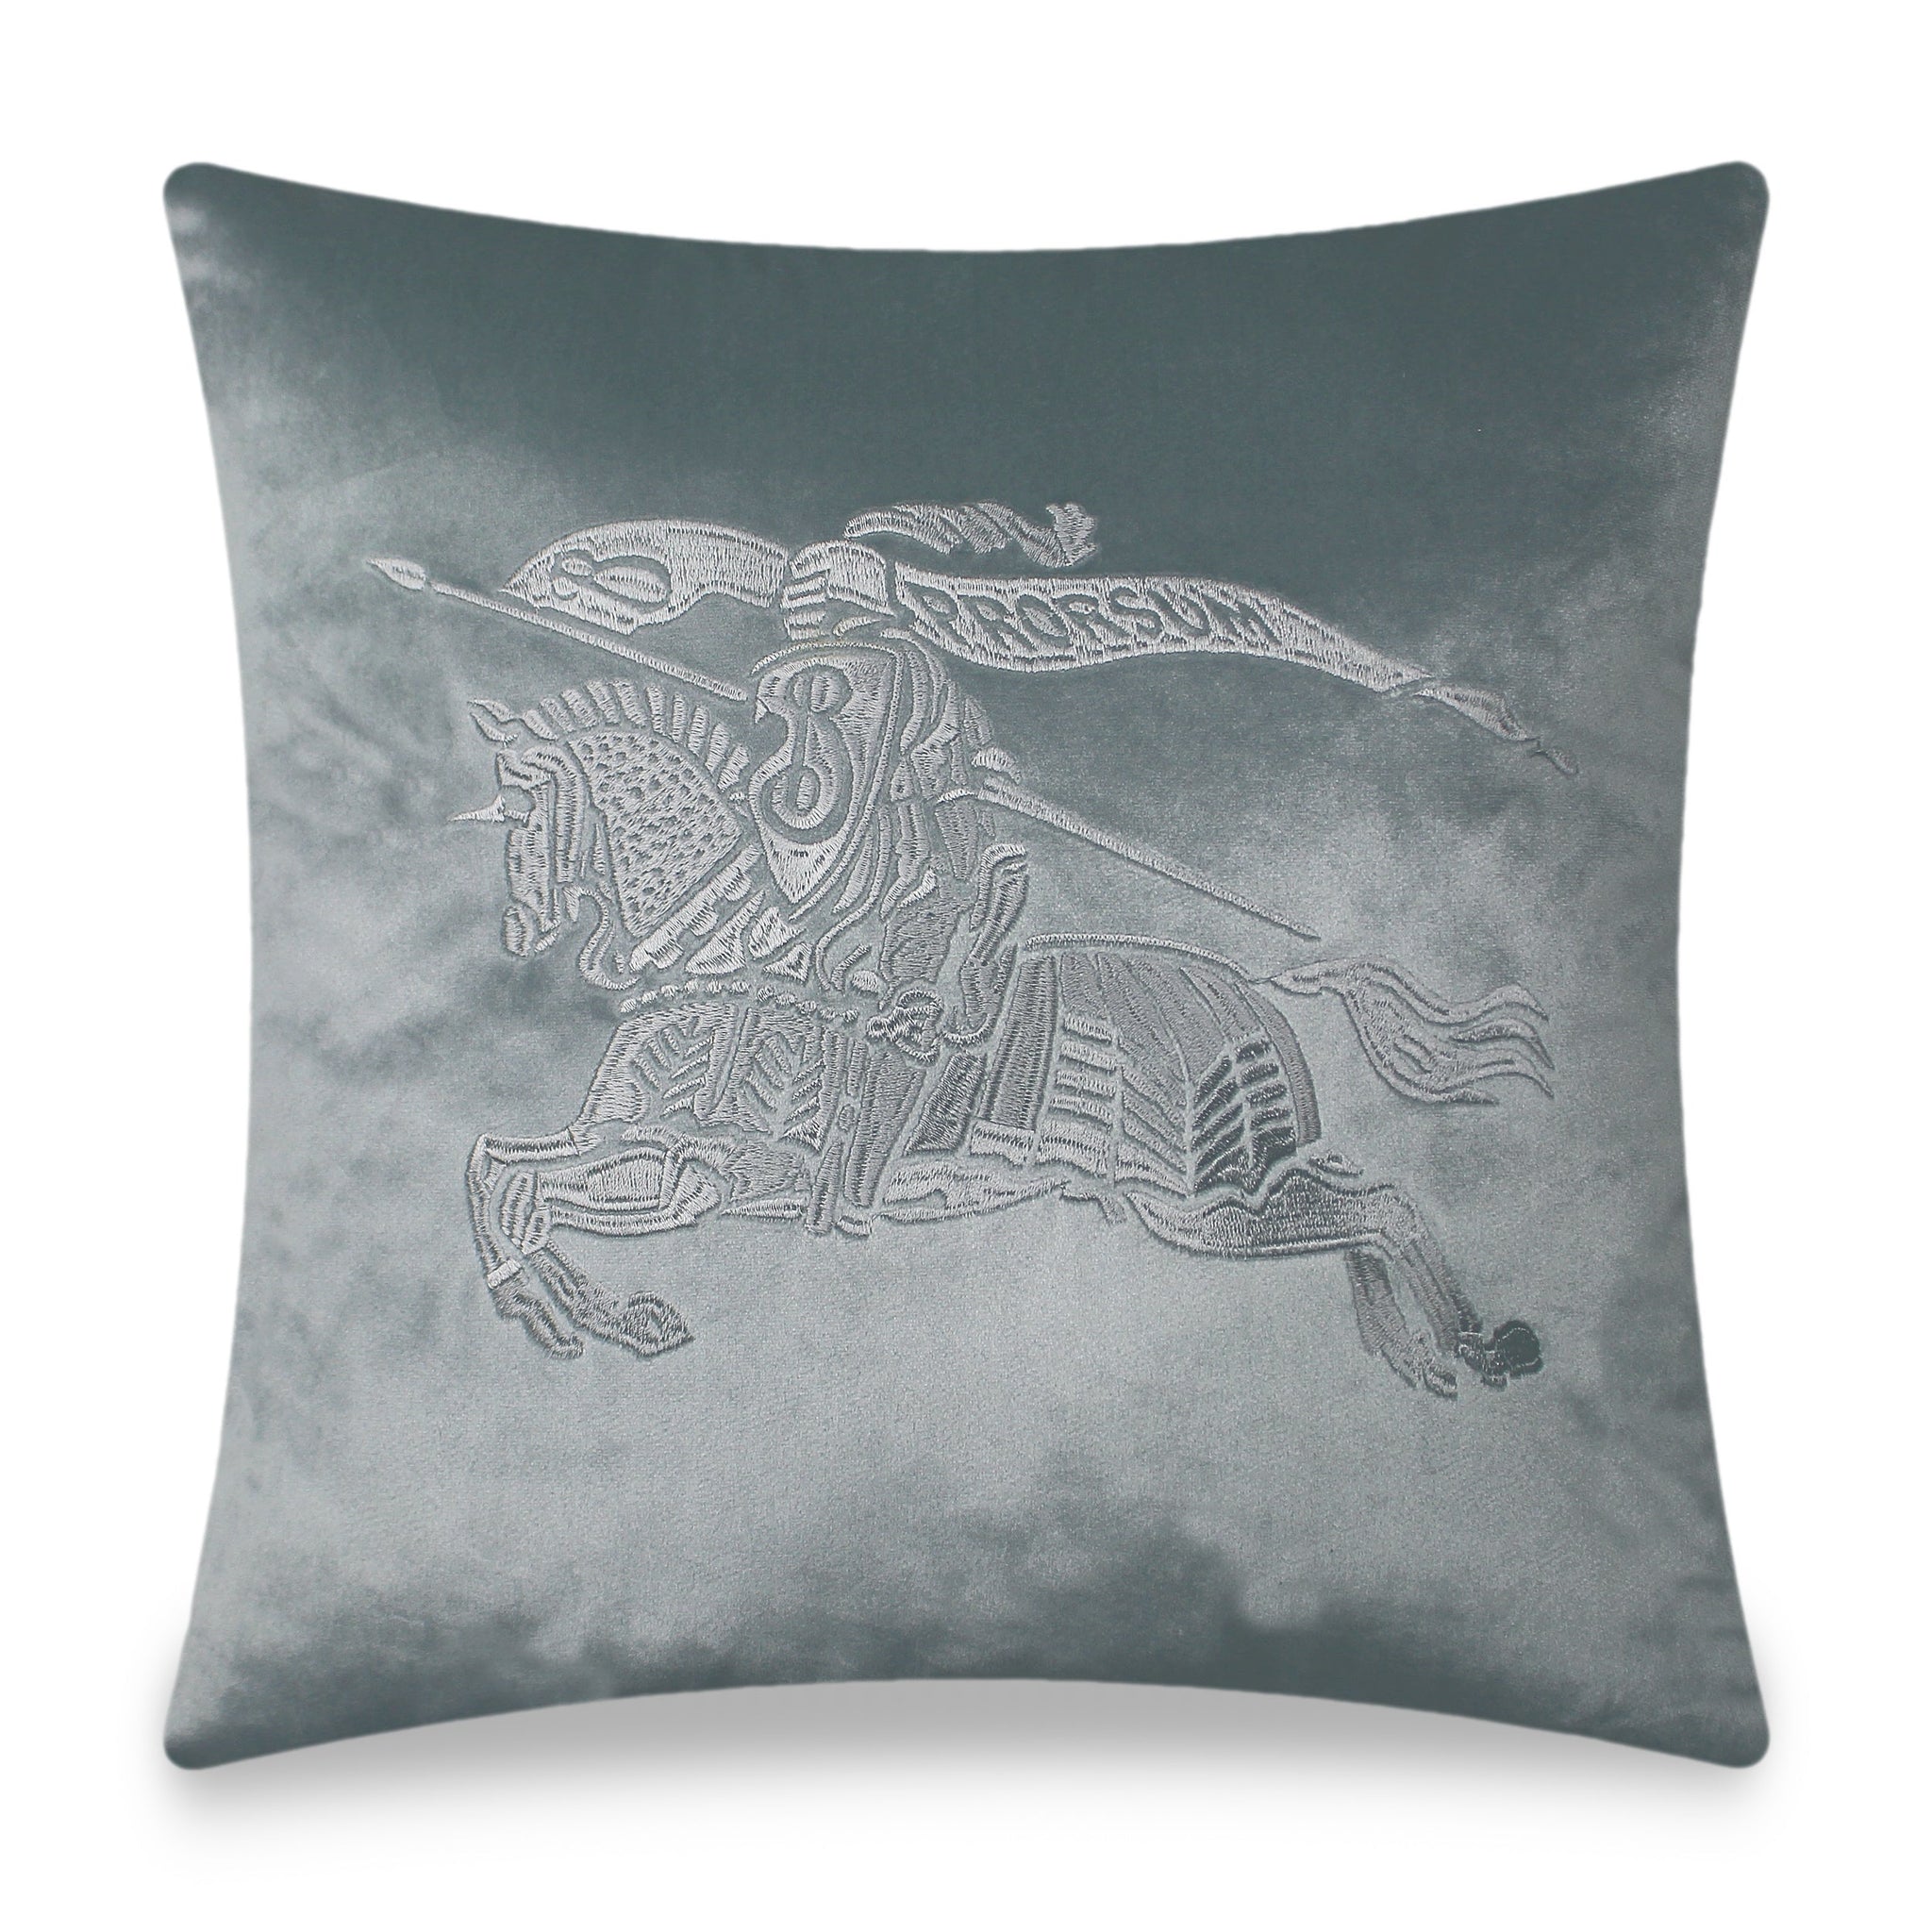 Grey Pillow Cover Velvet Decorative Cushion Cover Embroidery  Iconic Horse Throw Pillow Pillow Case for Sofa Chair Bedroom Living Room 45x45 cm 18x18 Inches